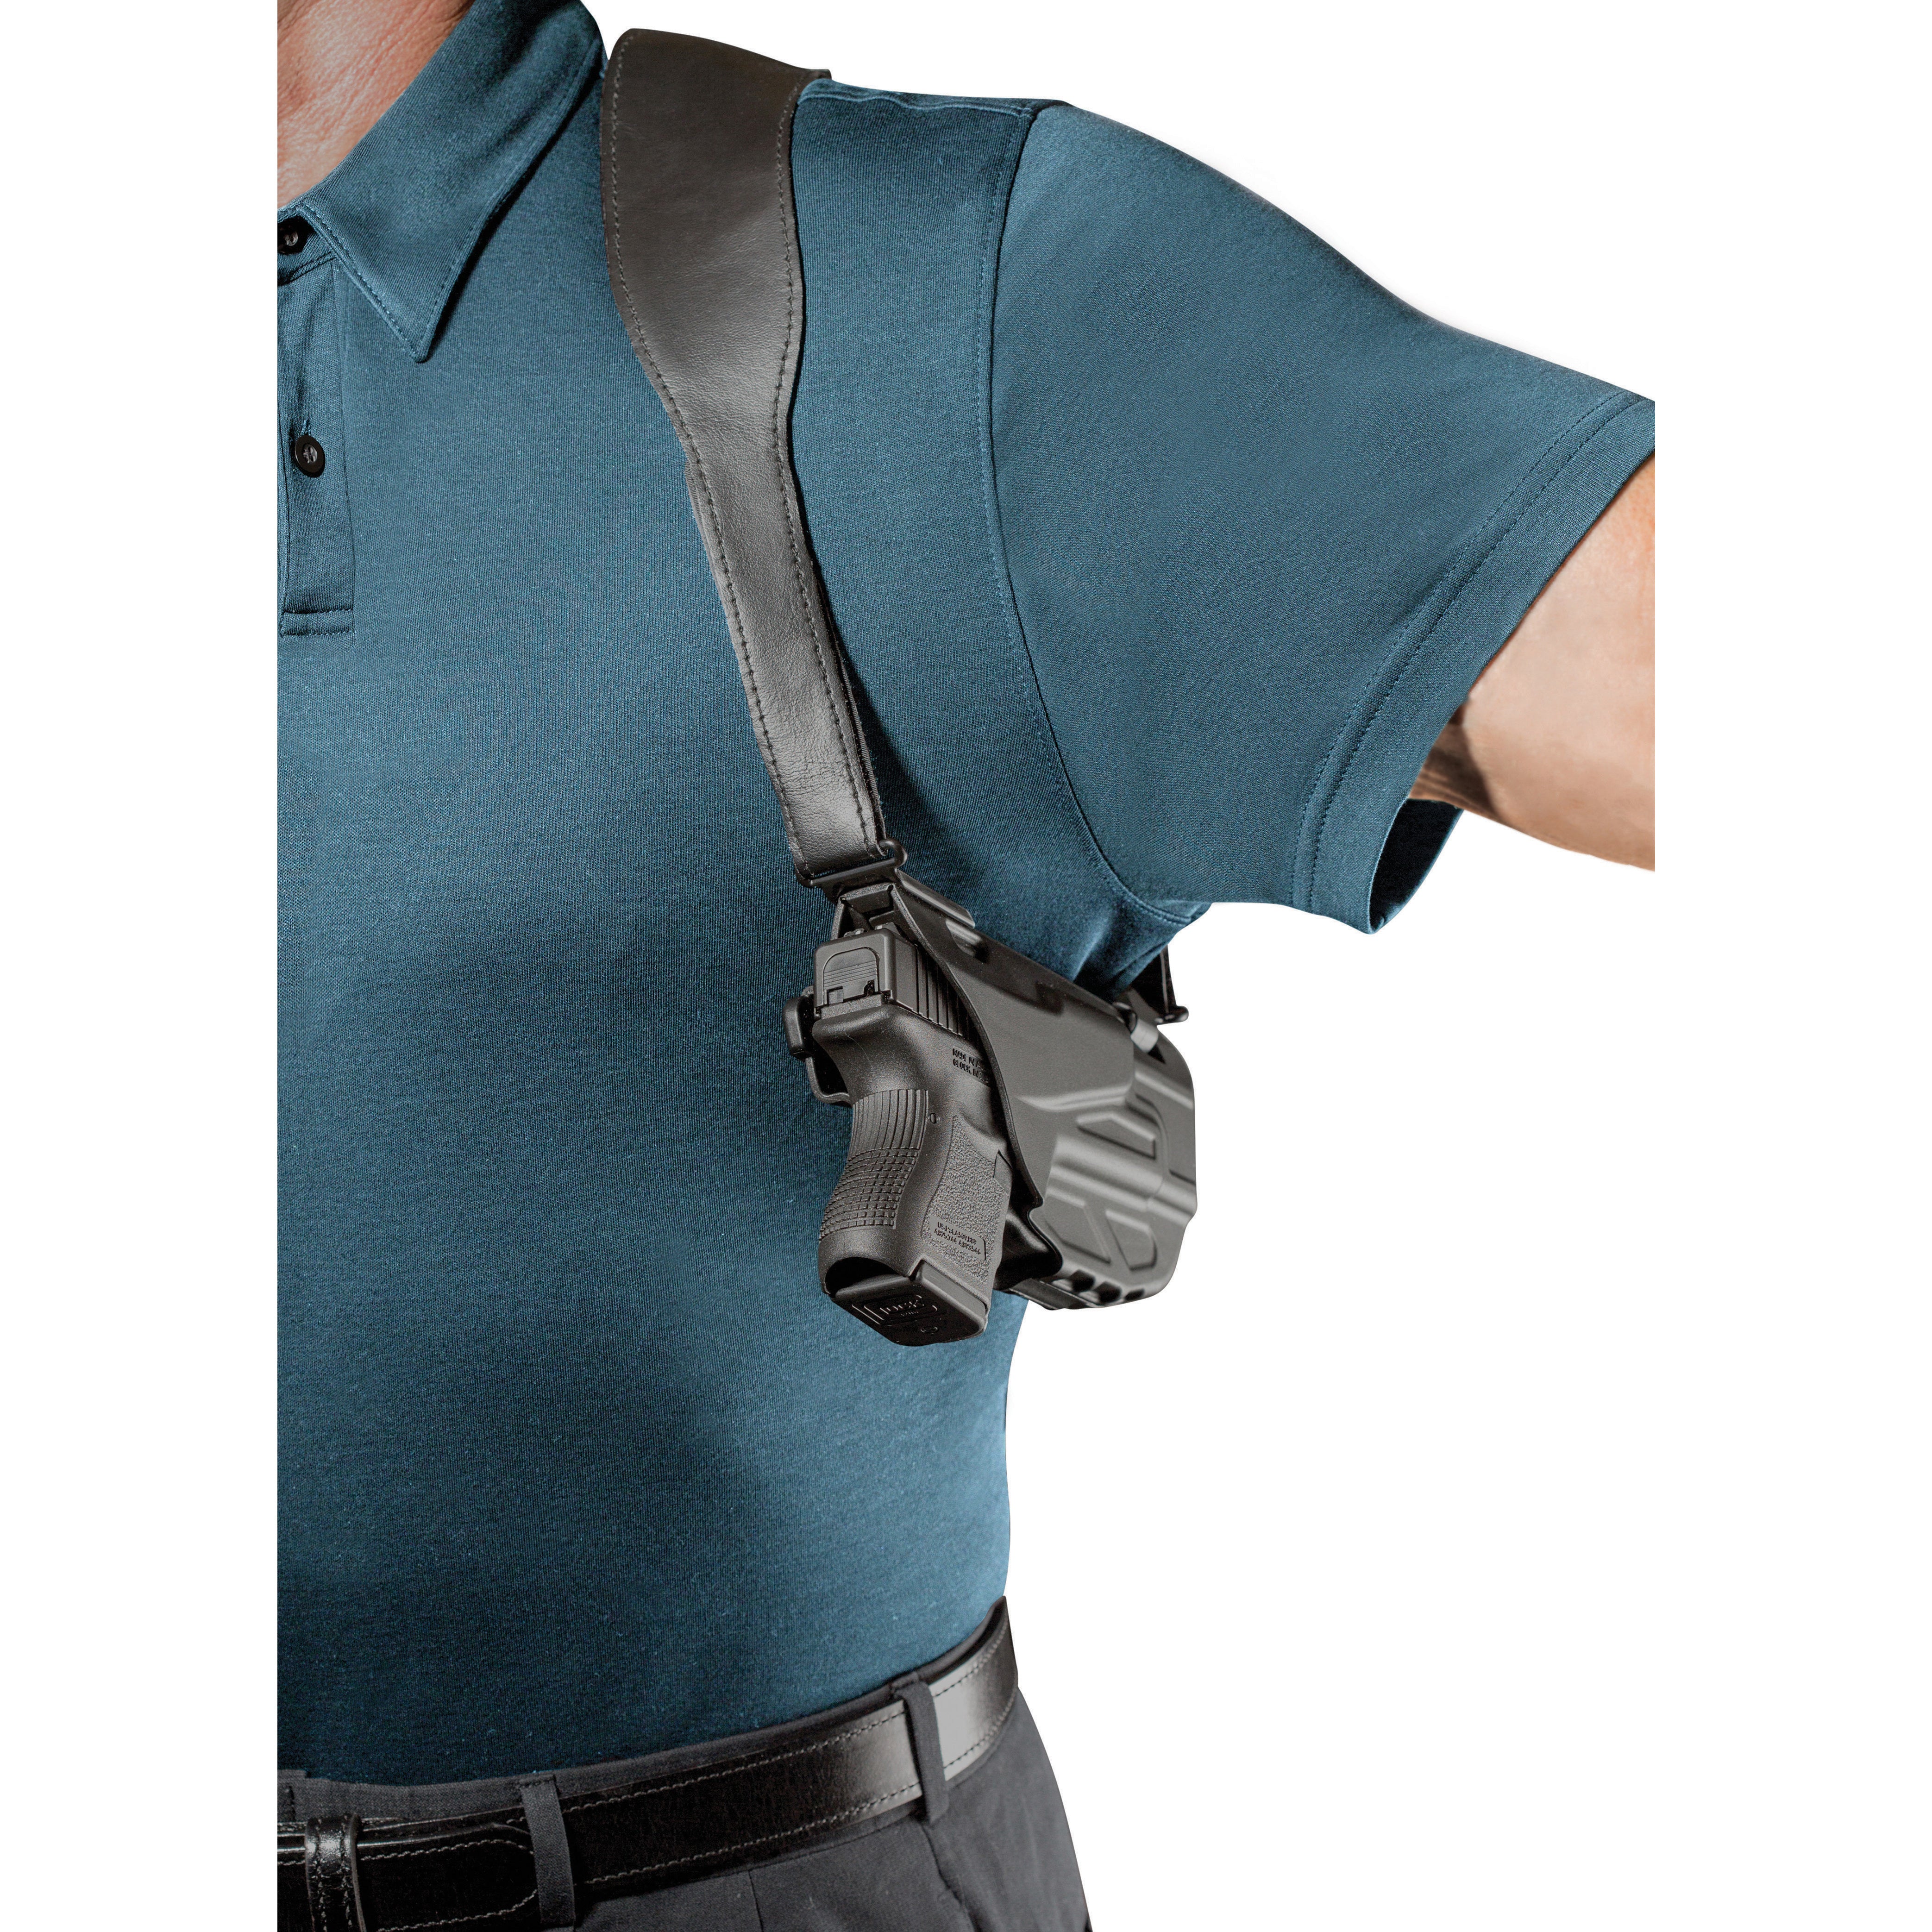 7053 7TS™ ALS® Shoulder Holster - Fits S&W M&P Shield 9/40 Only | Safariland